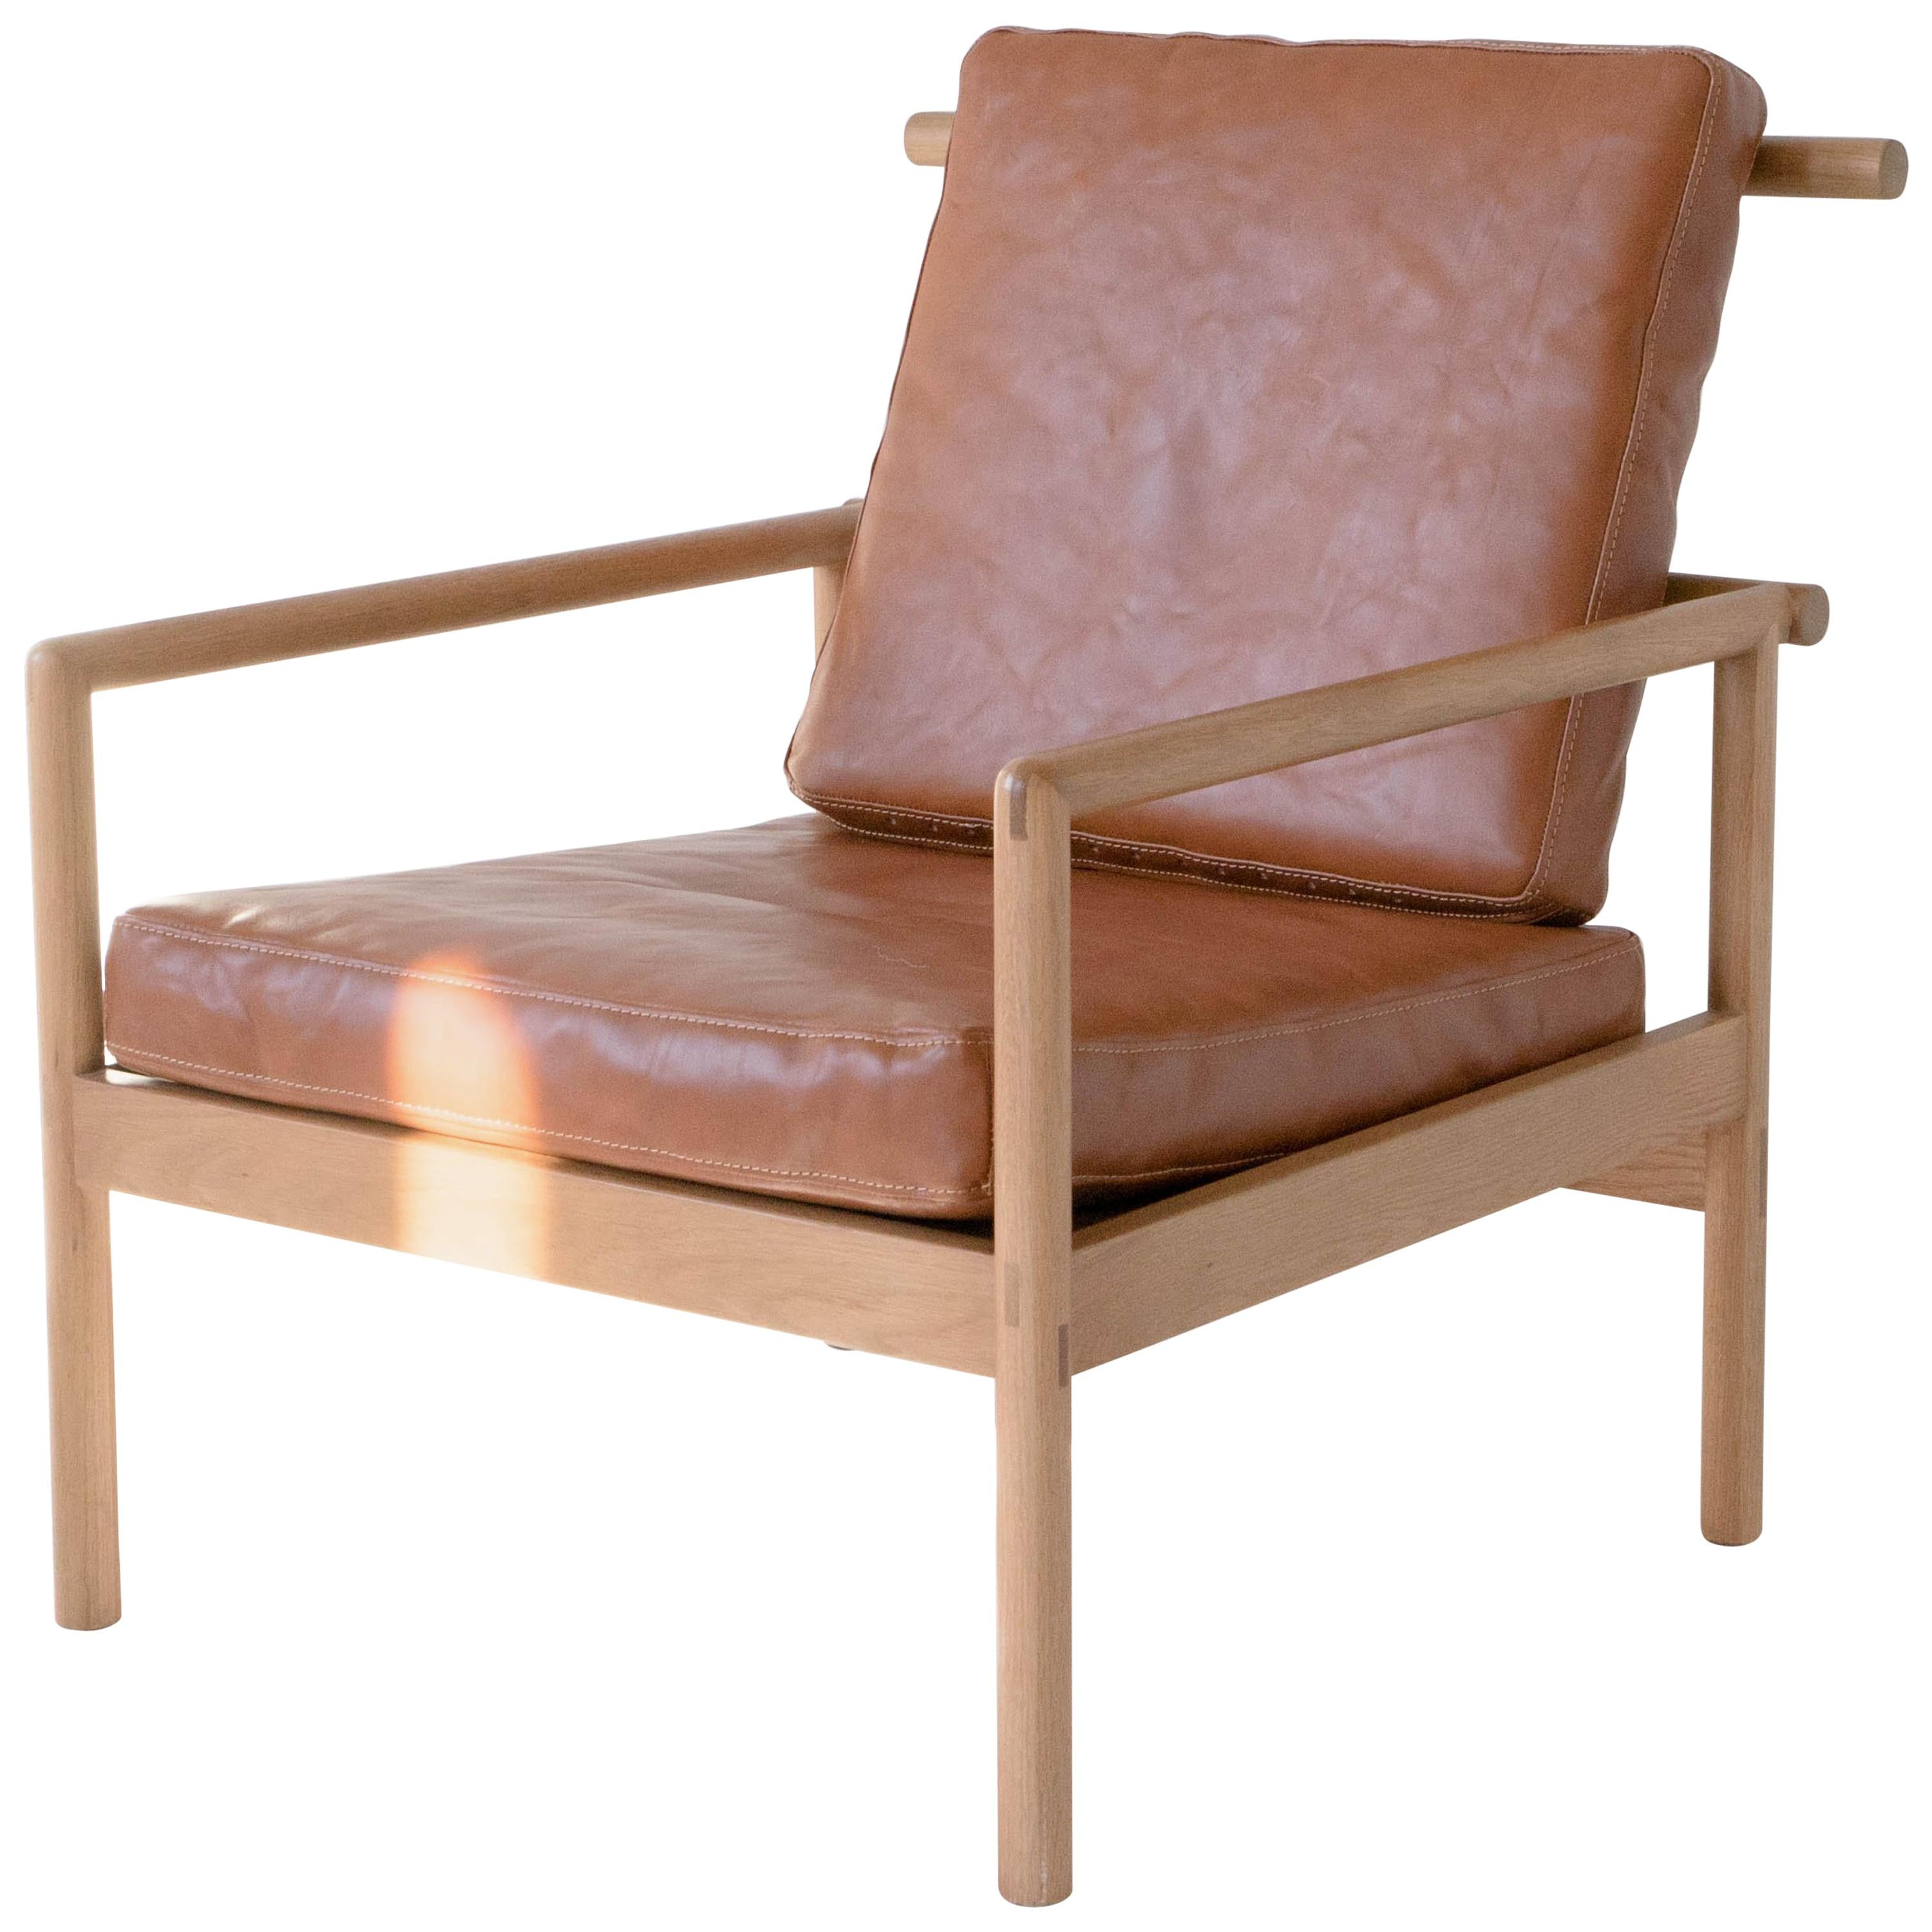 Ten Chair by Sun at Six, Sienna Midcentury Lounge Chair in Wood, Leather